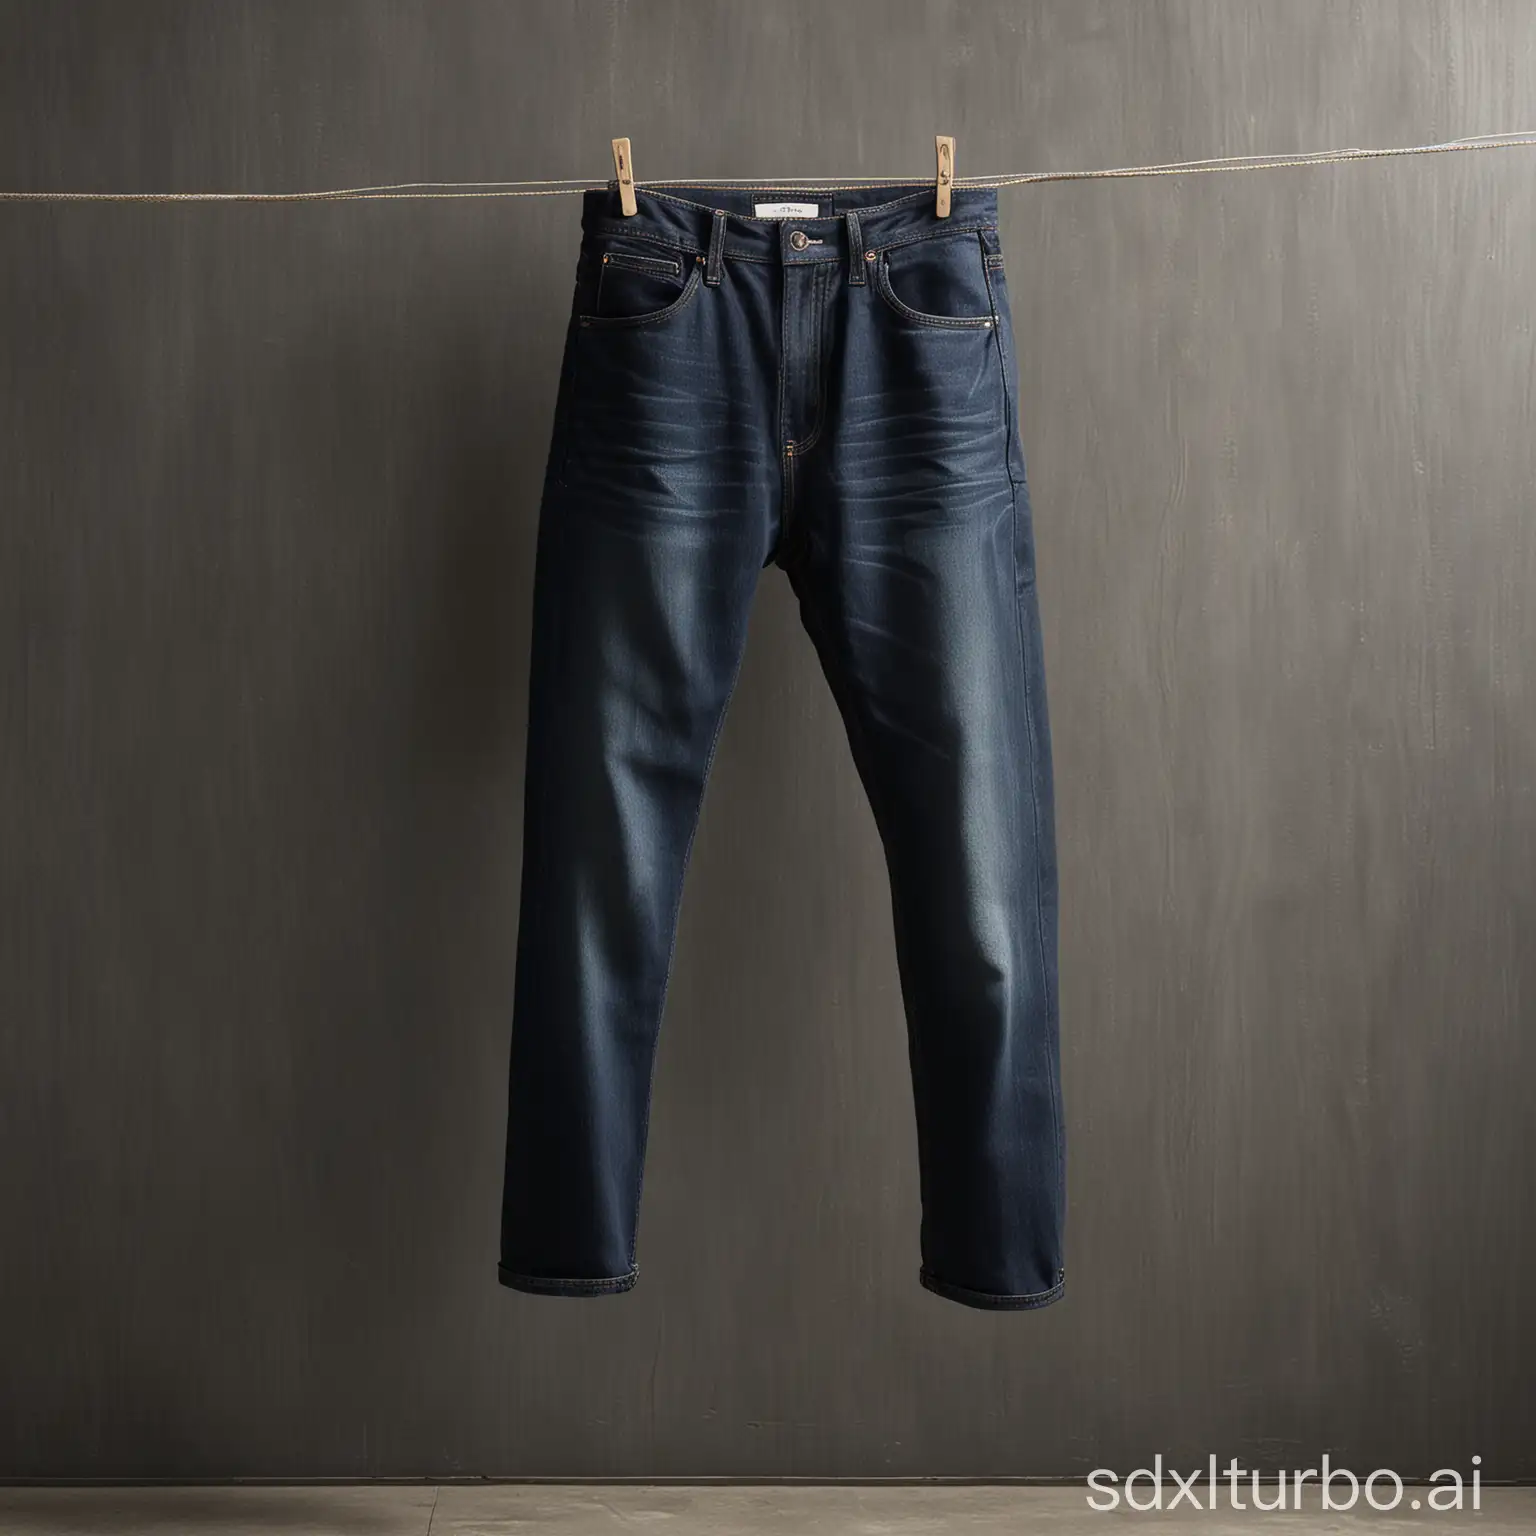 A pair of dark denim jeans hanging on a clothesline. The jeans are made of a thick, sturdy denim fabric and have a classic five-pocket design. The light hitting the jeans creates shadows that highlight the texture of the fabric.